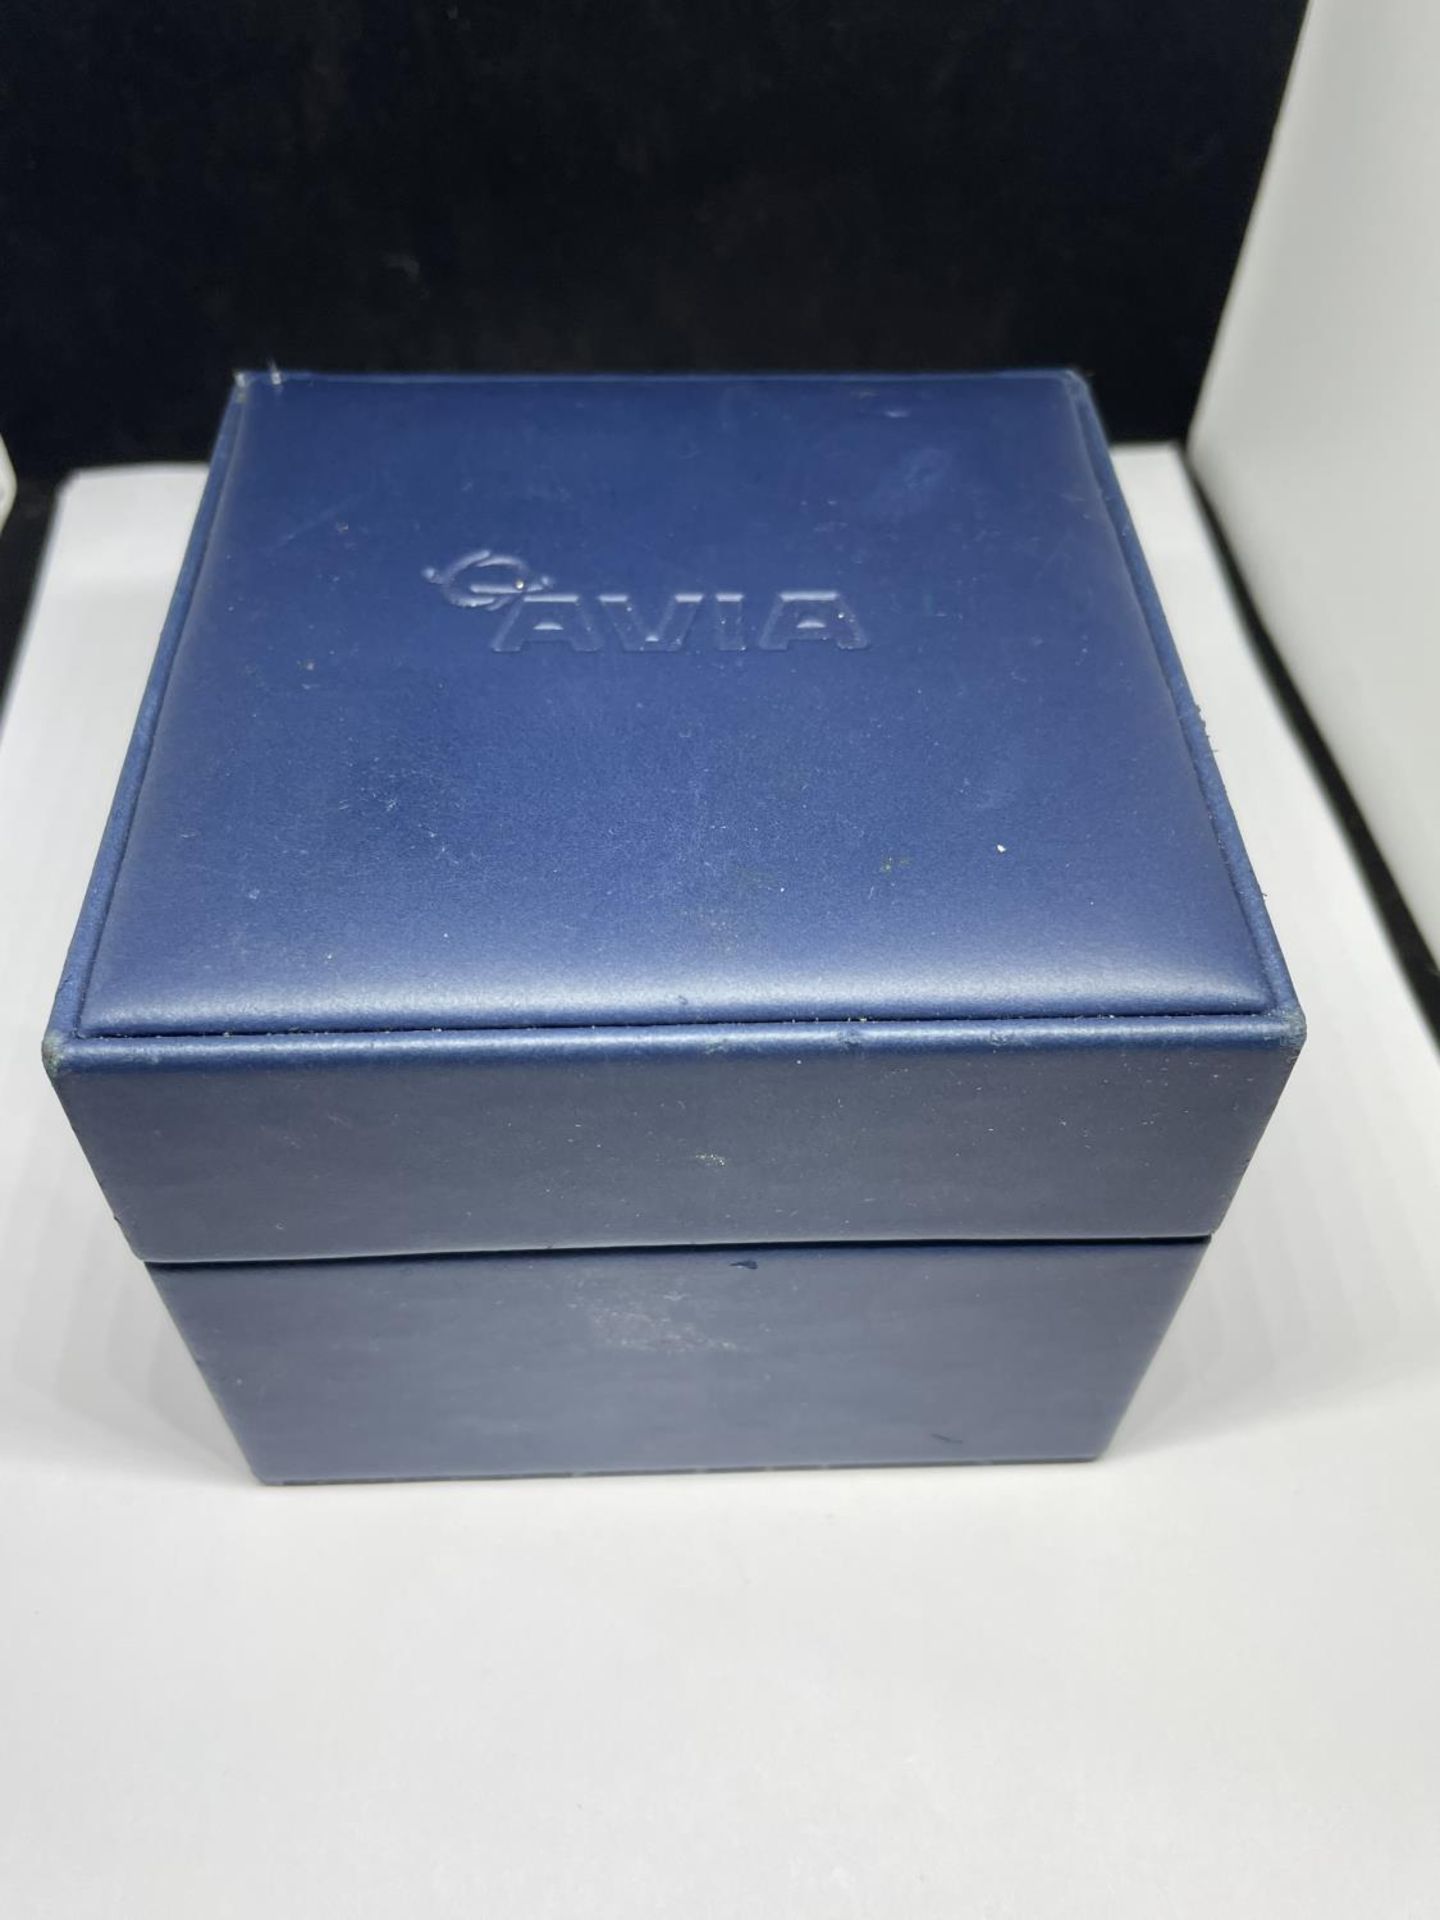 A BOXED AVIA WRIST WATCH SEEN WORKING BUT NO WARRANTY - Image 3 of 3